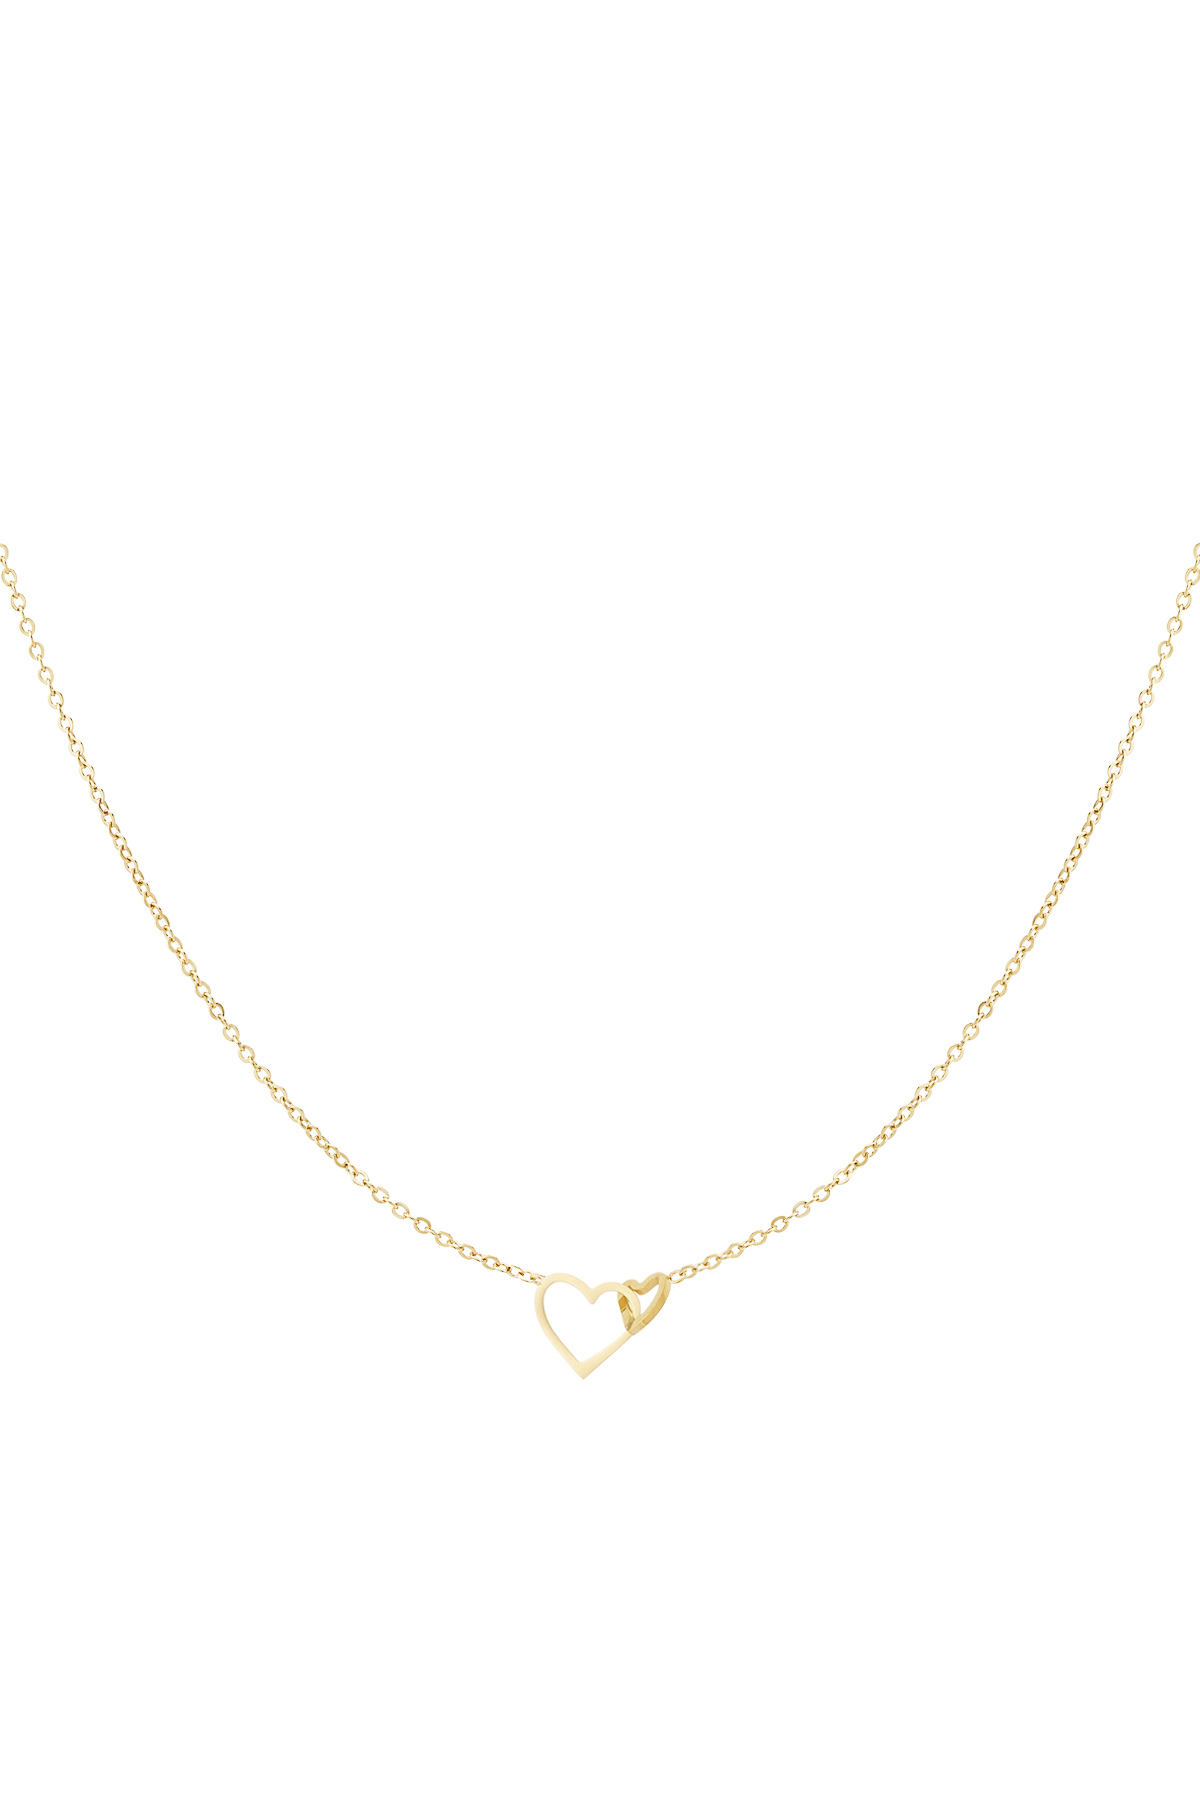 Eternal love necklace - gold h5 Picture3